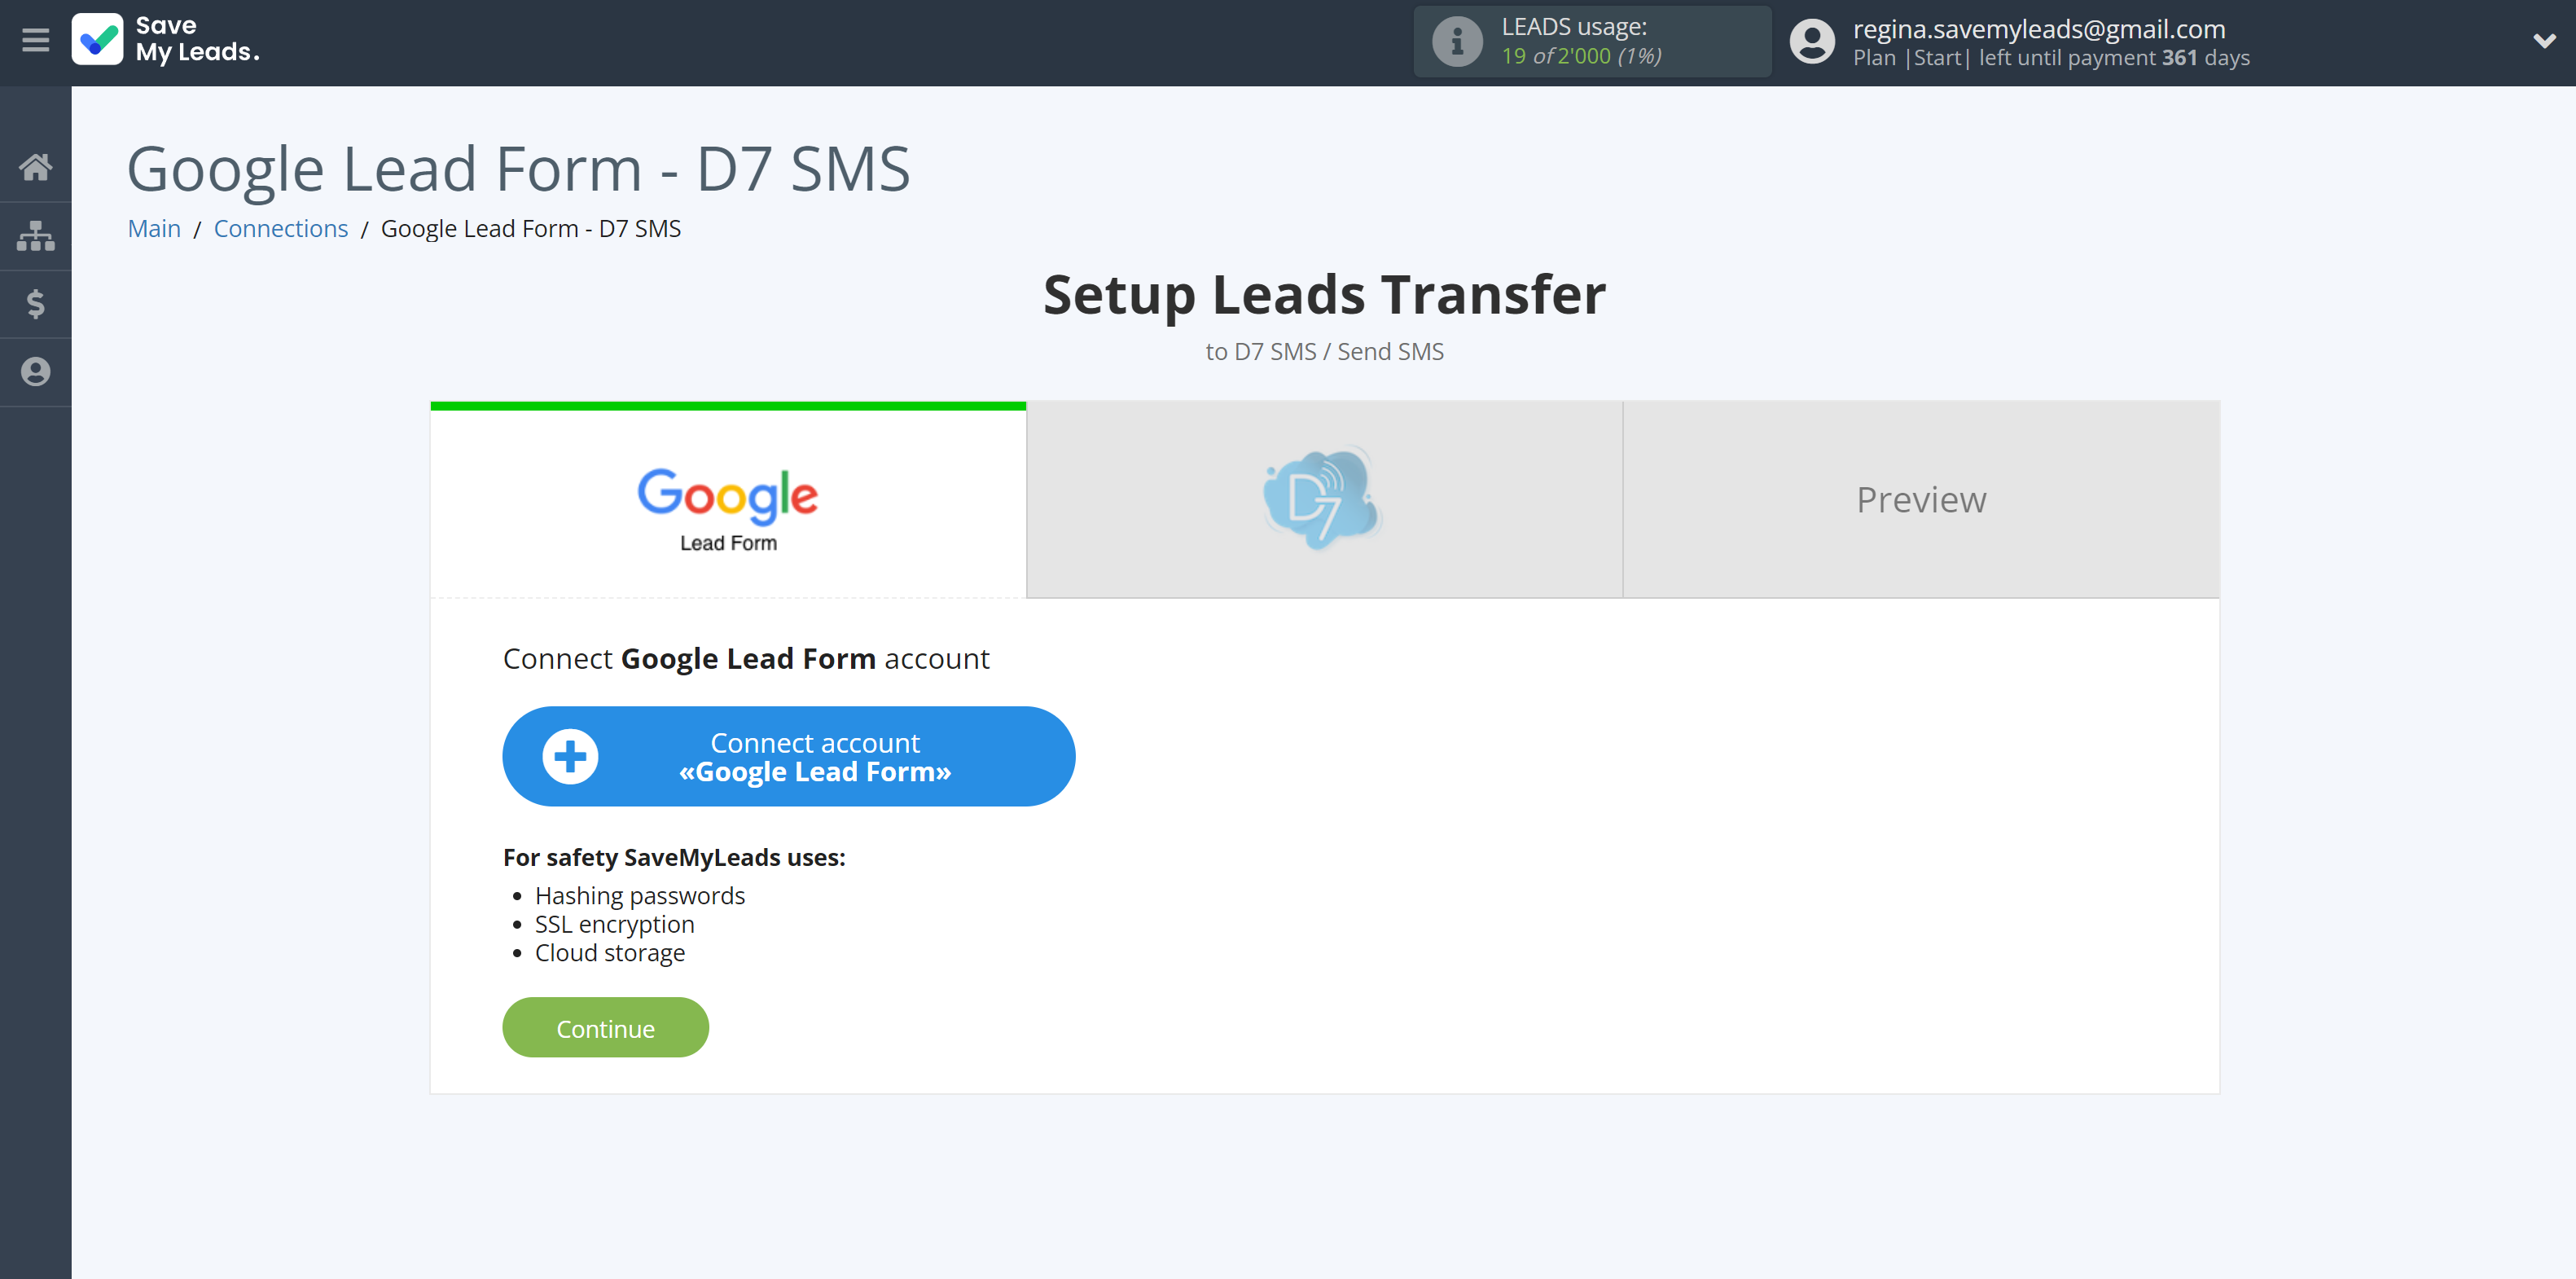 How to Connect Google Lead Form with D7 SMS | Data Source account connection